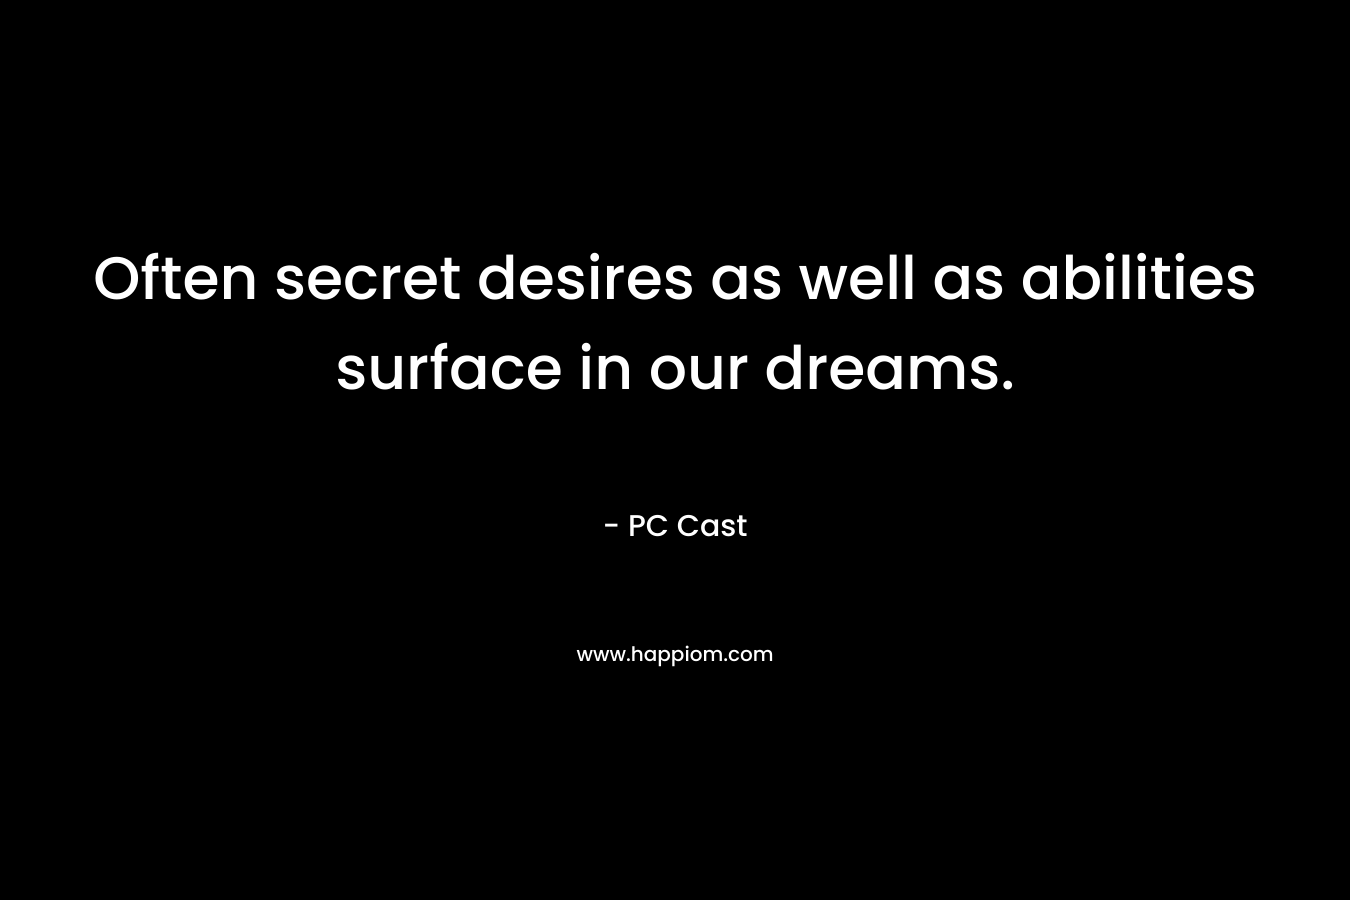 Often secret desires as well as abilities surface in our dreams.